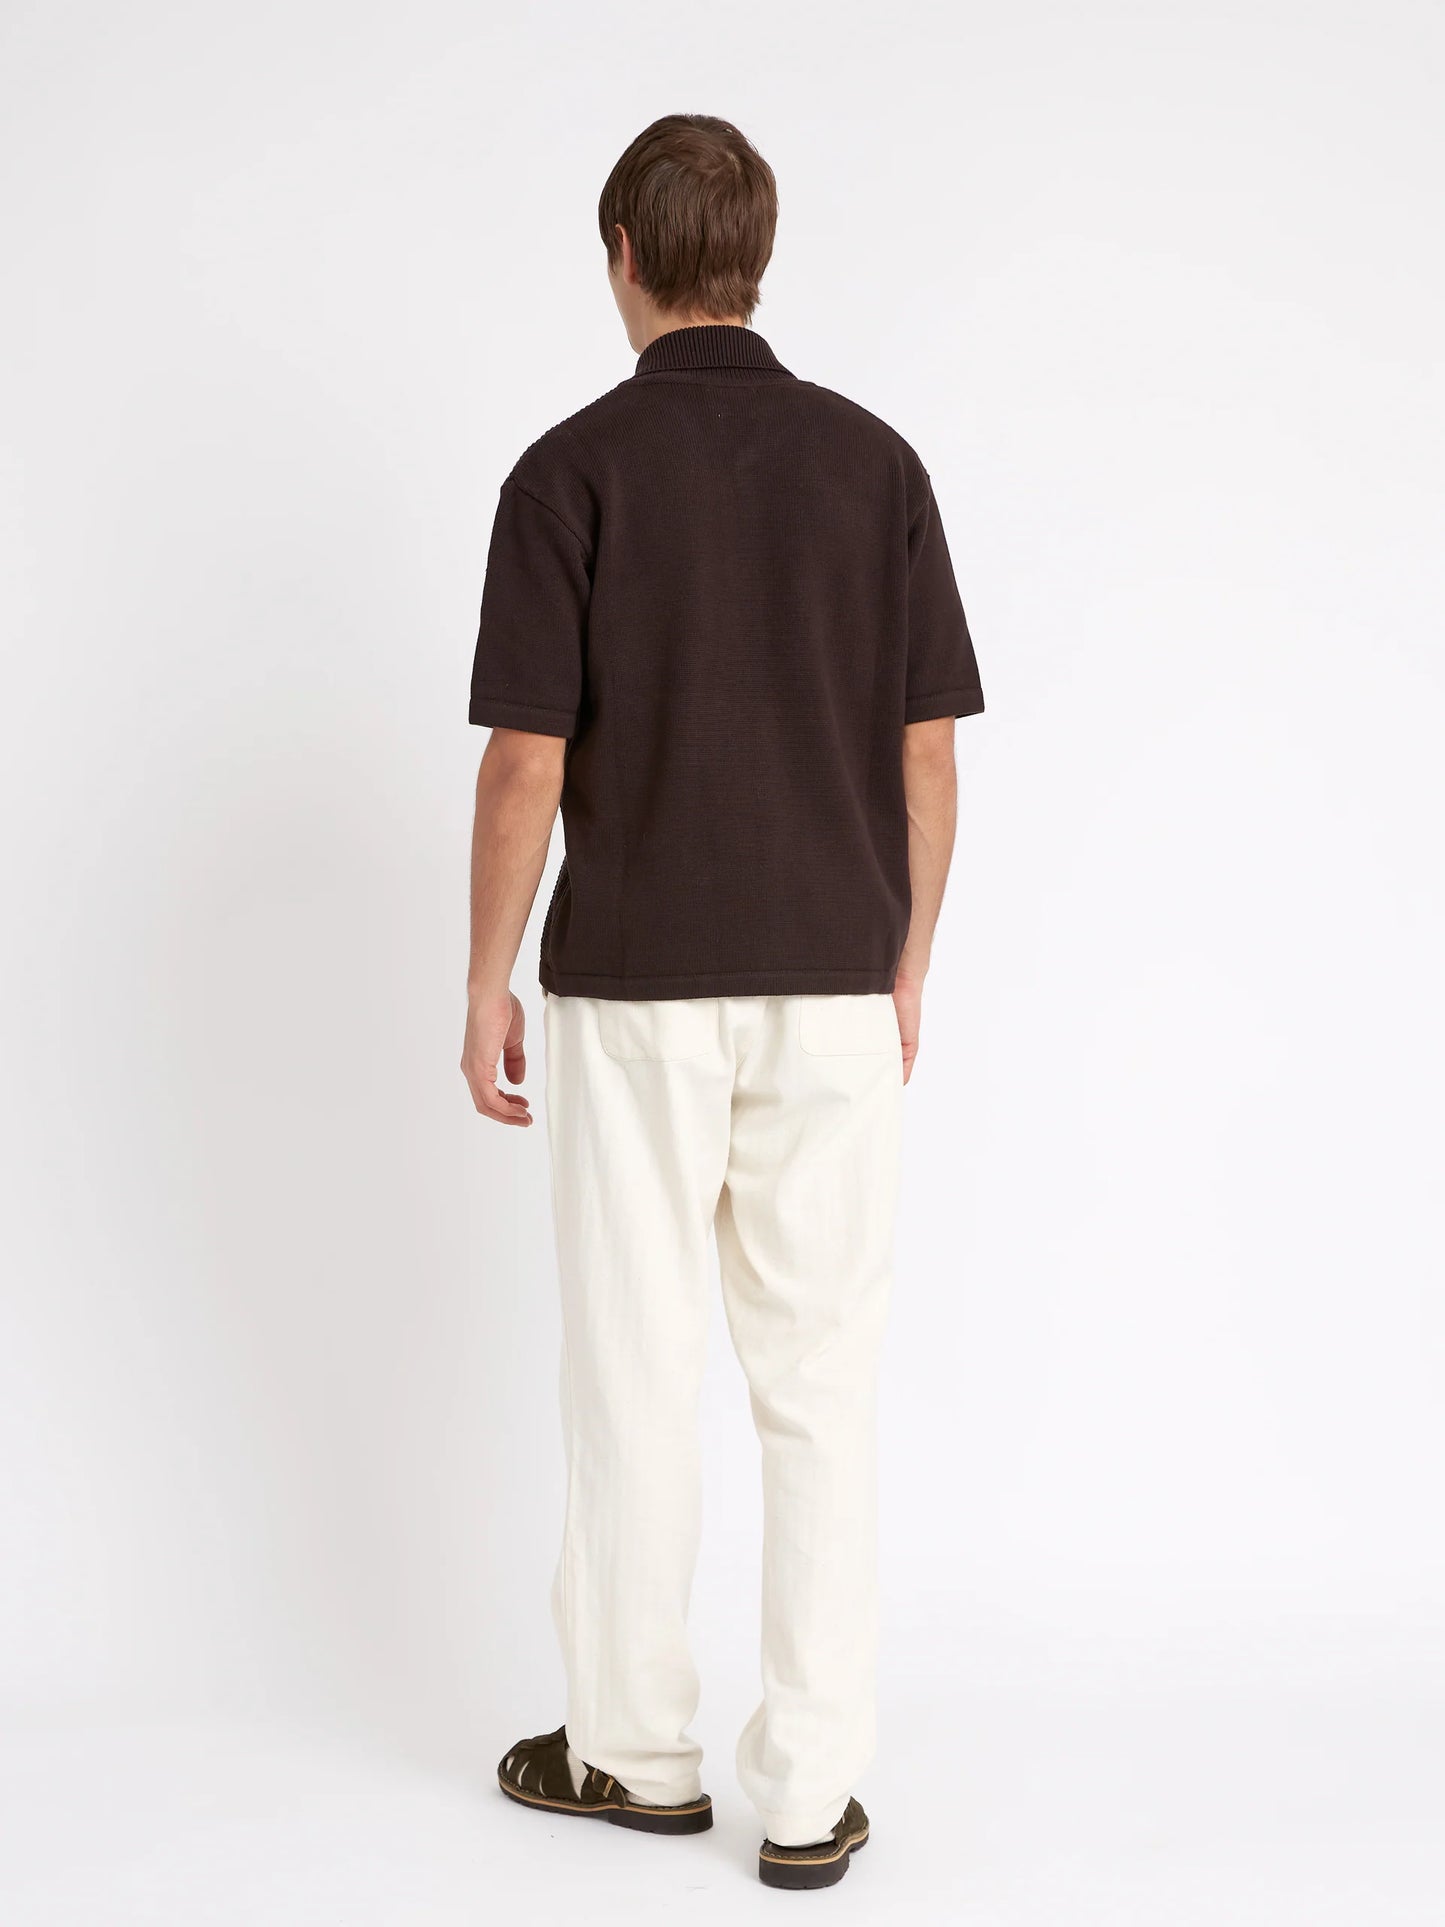 
                  
                    Mawes S/S Knitted Shirt - Tamar Brown
                  
                